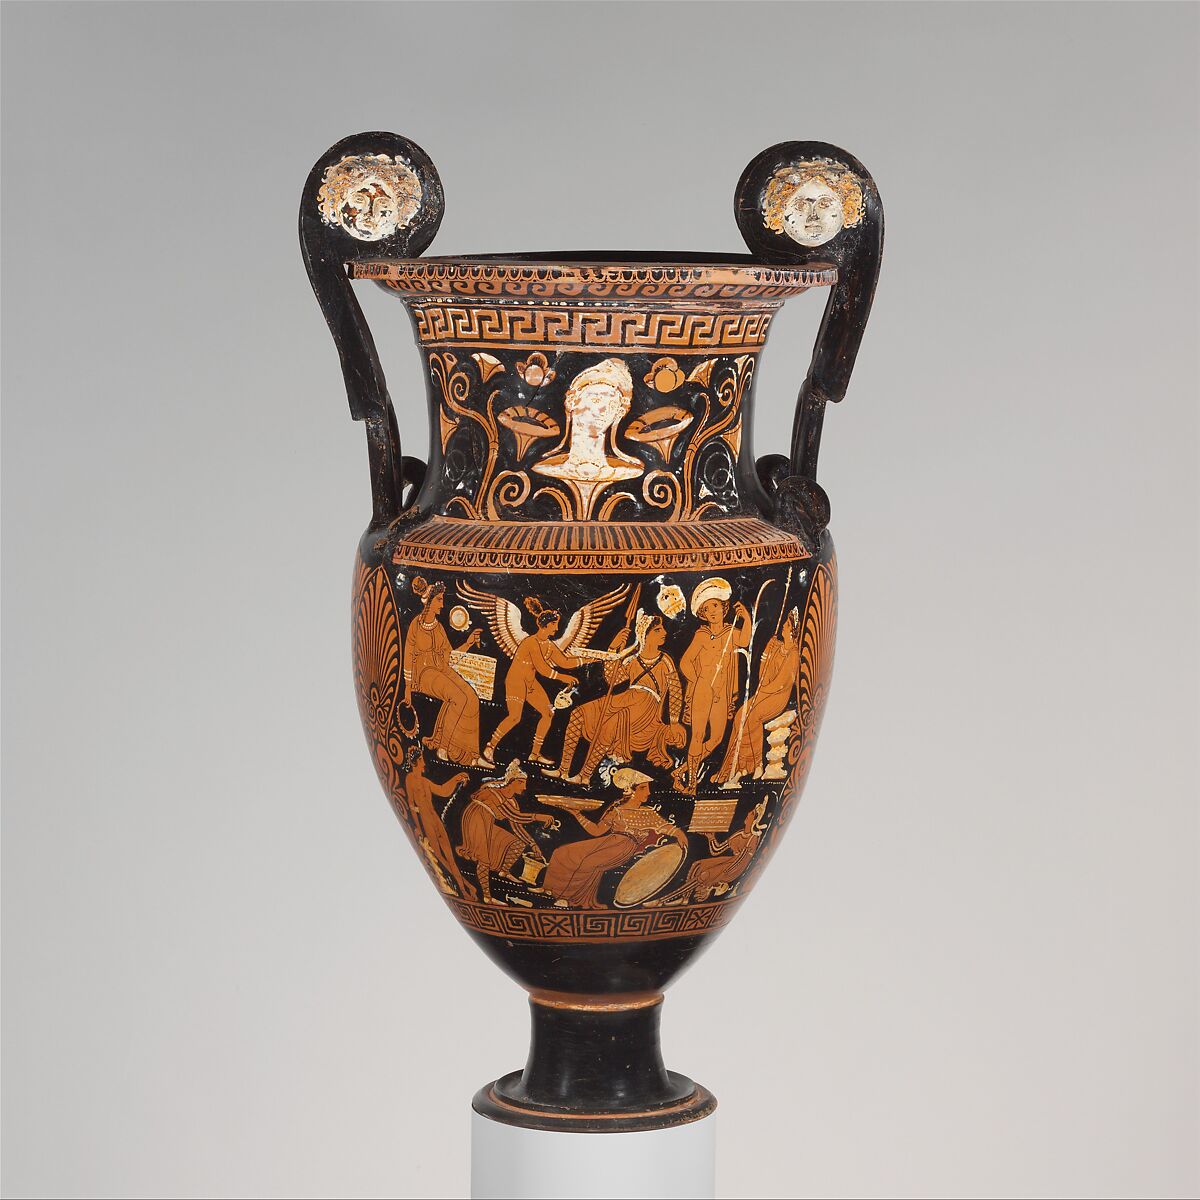 Terracotta volute-krater (mixing bowl)